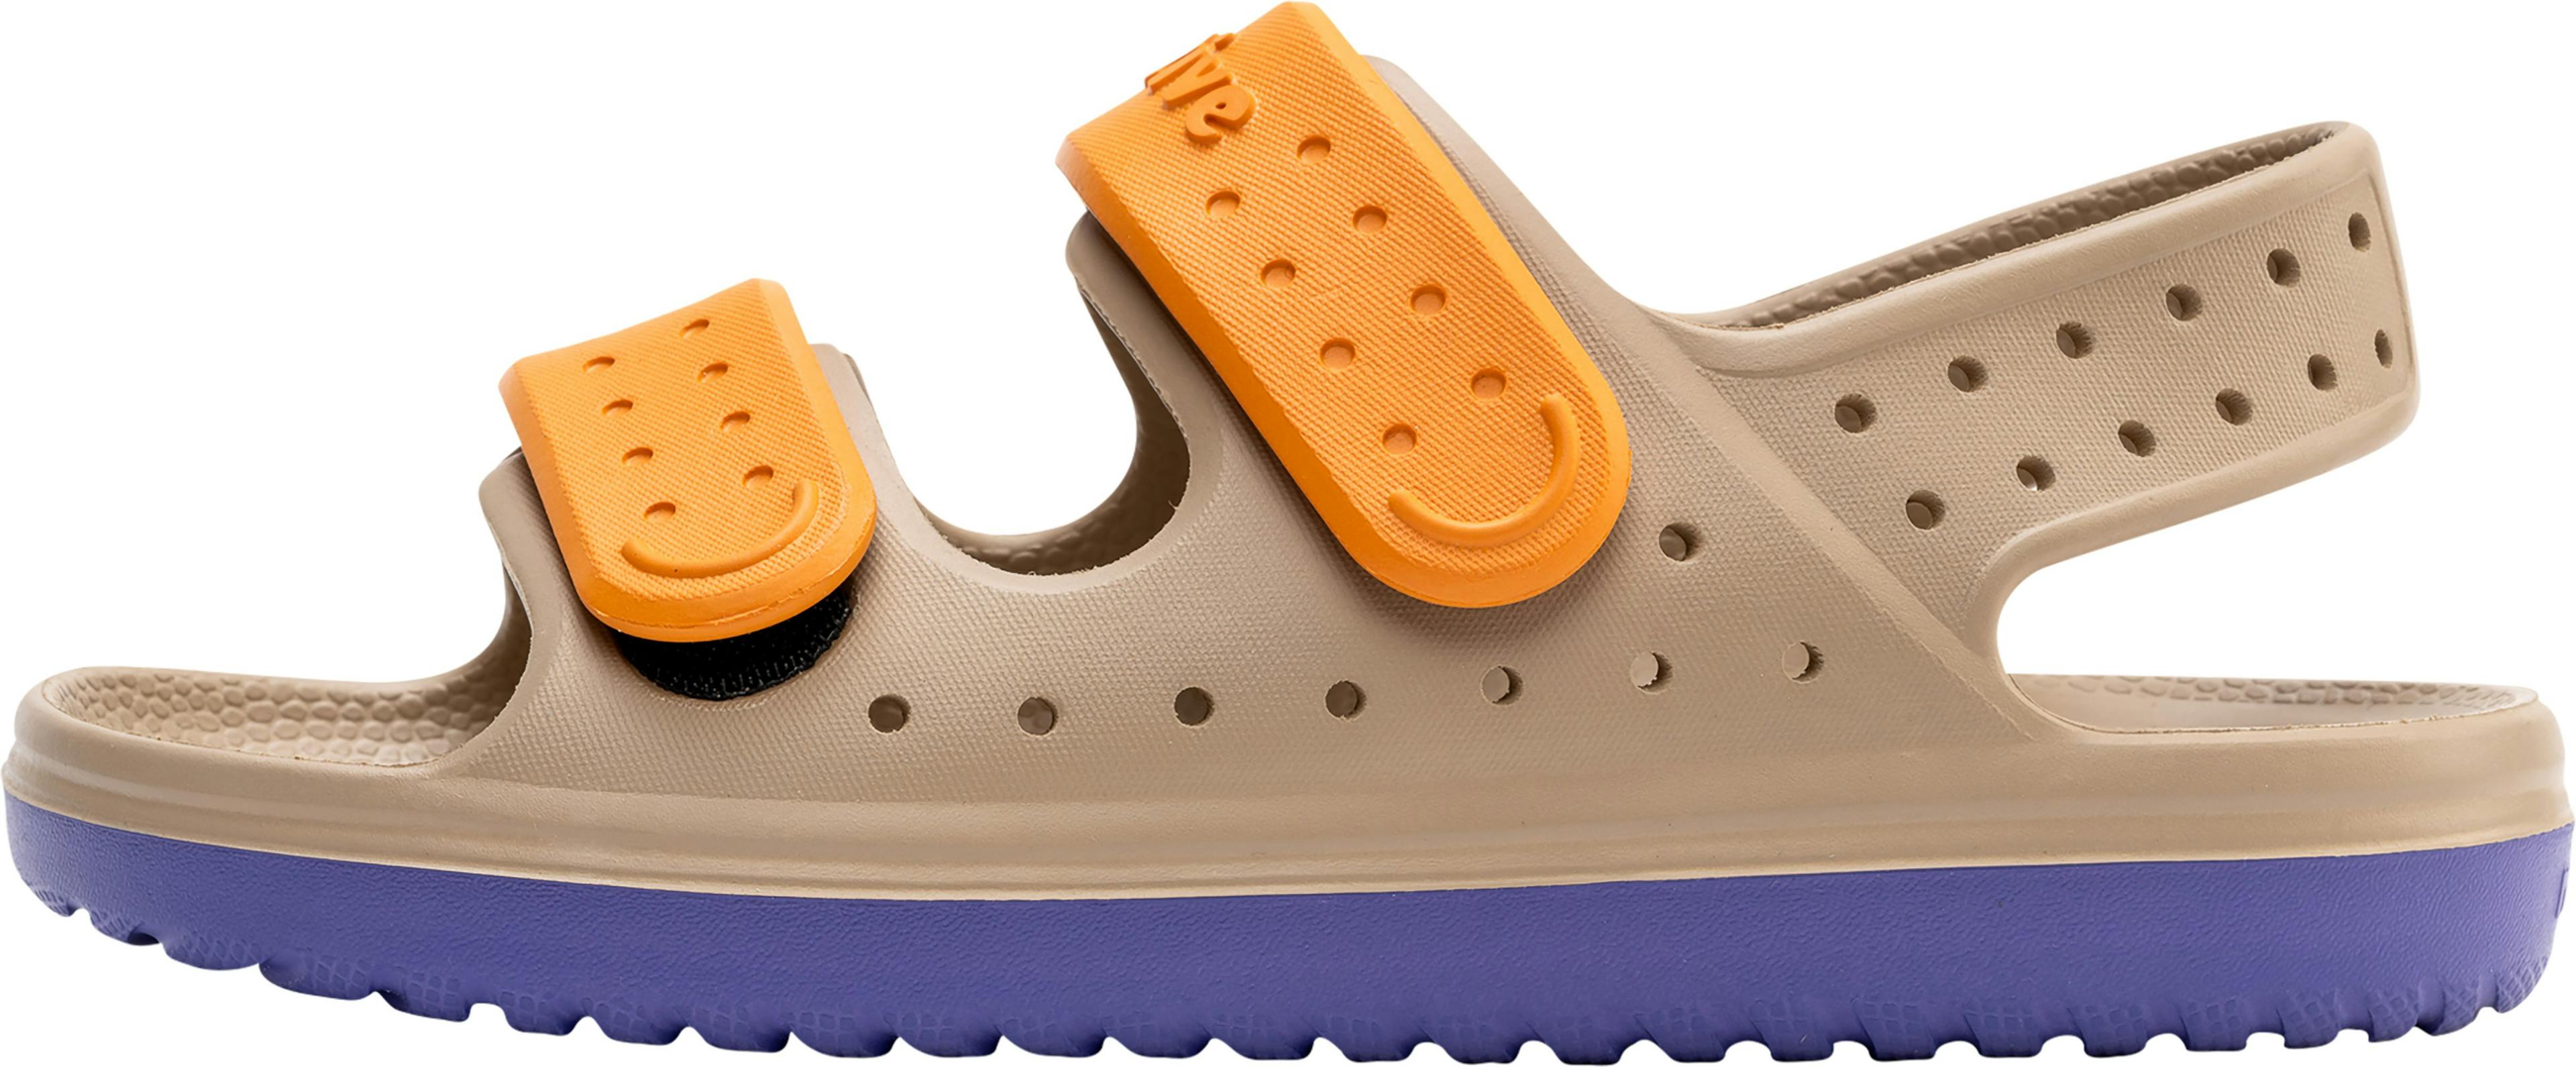 Product image for Chase Junior Shoes - Youth